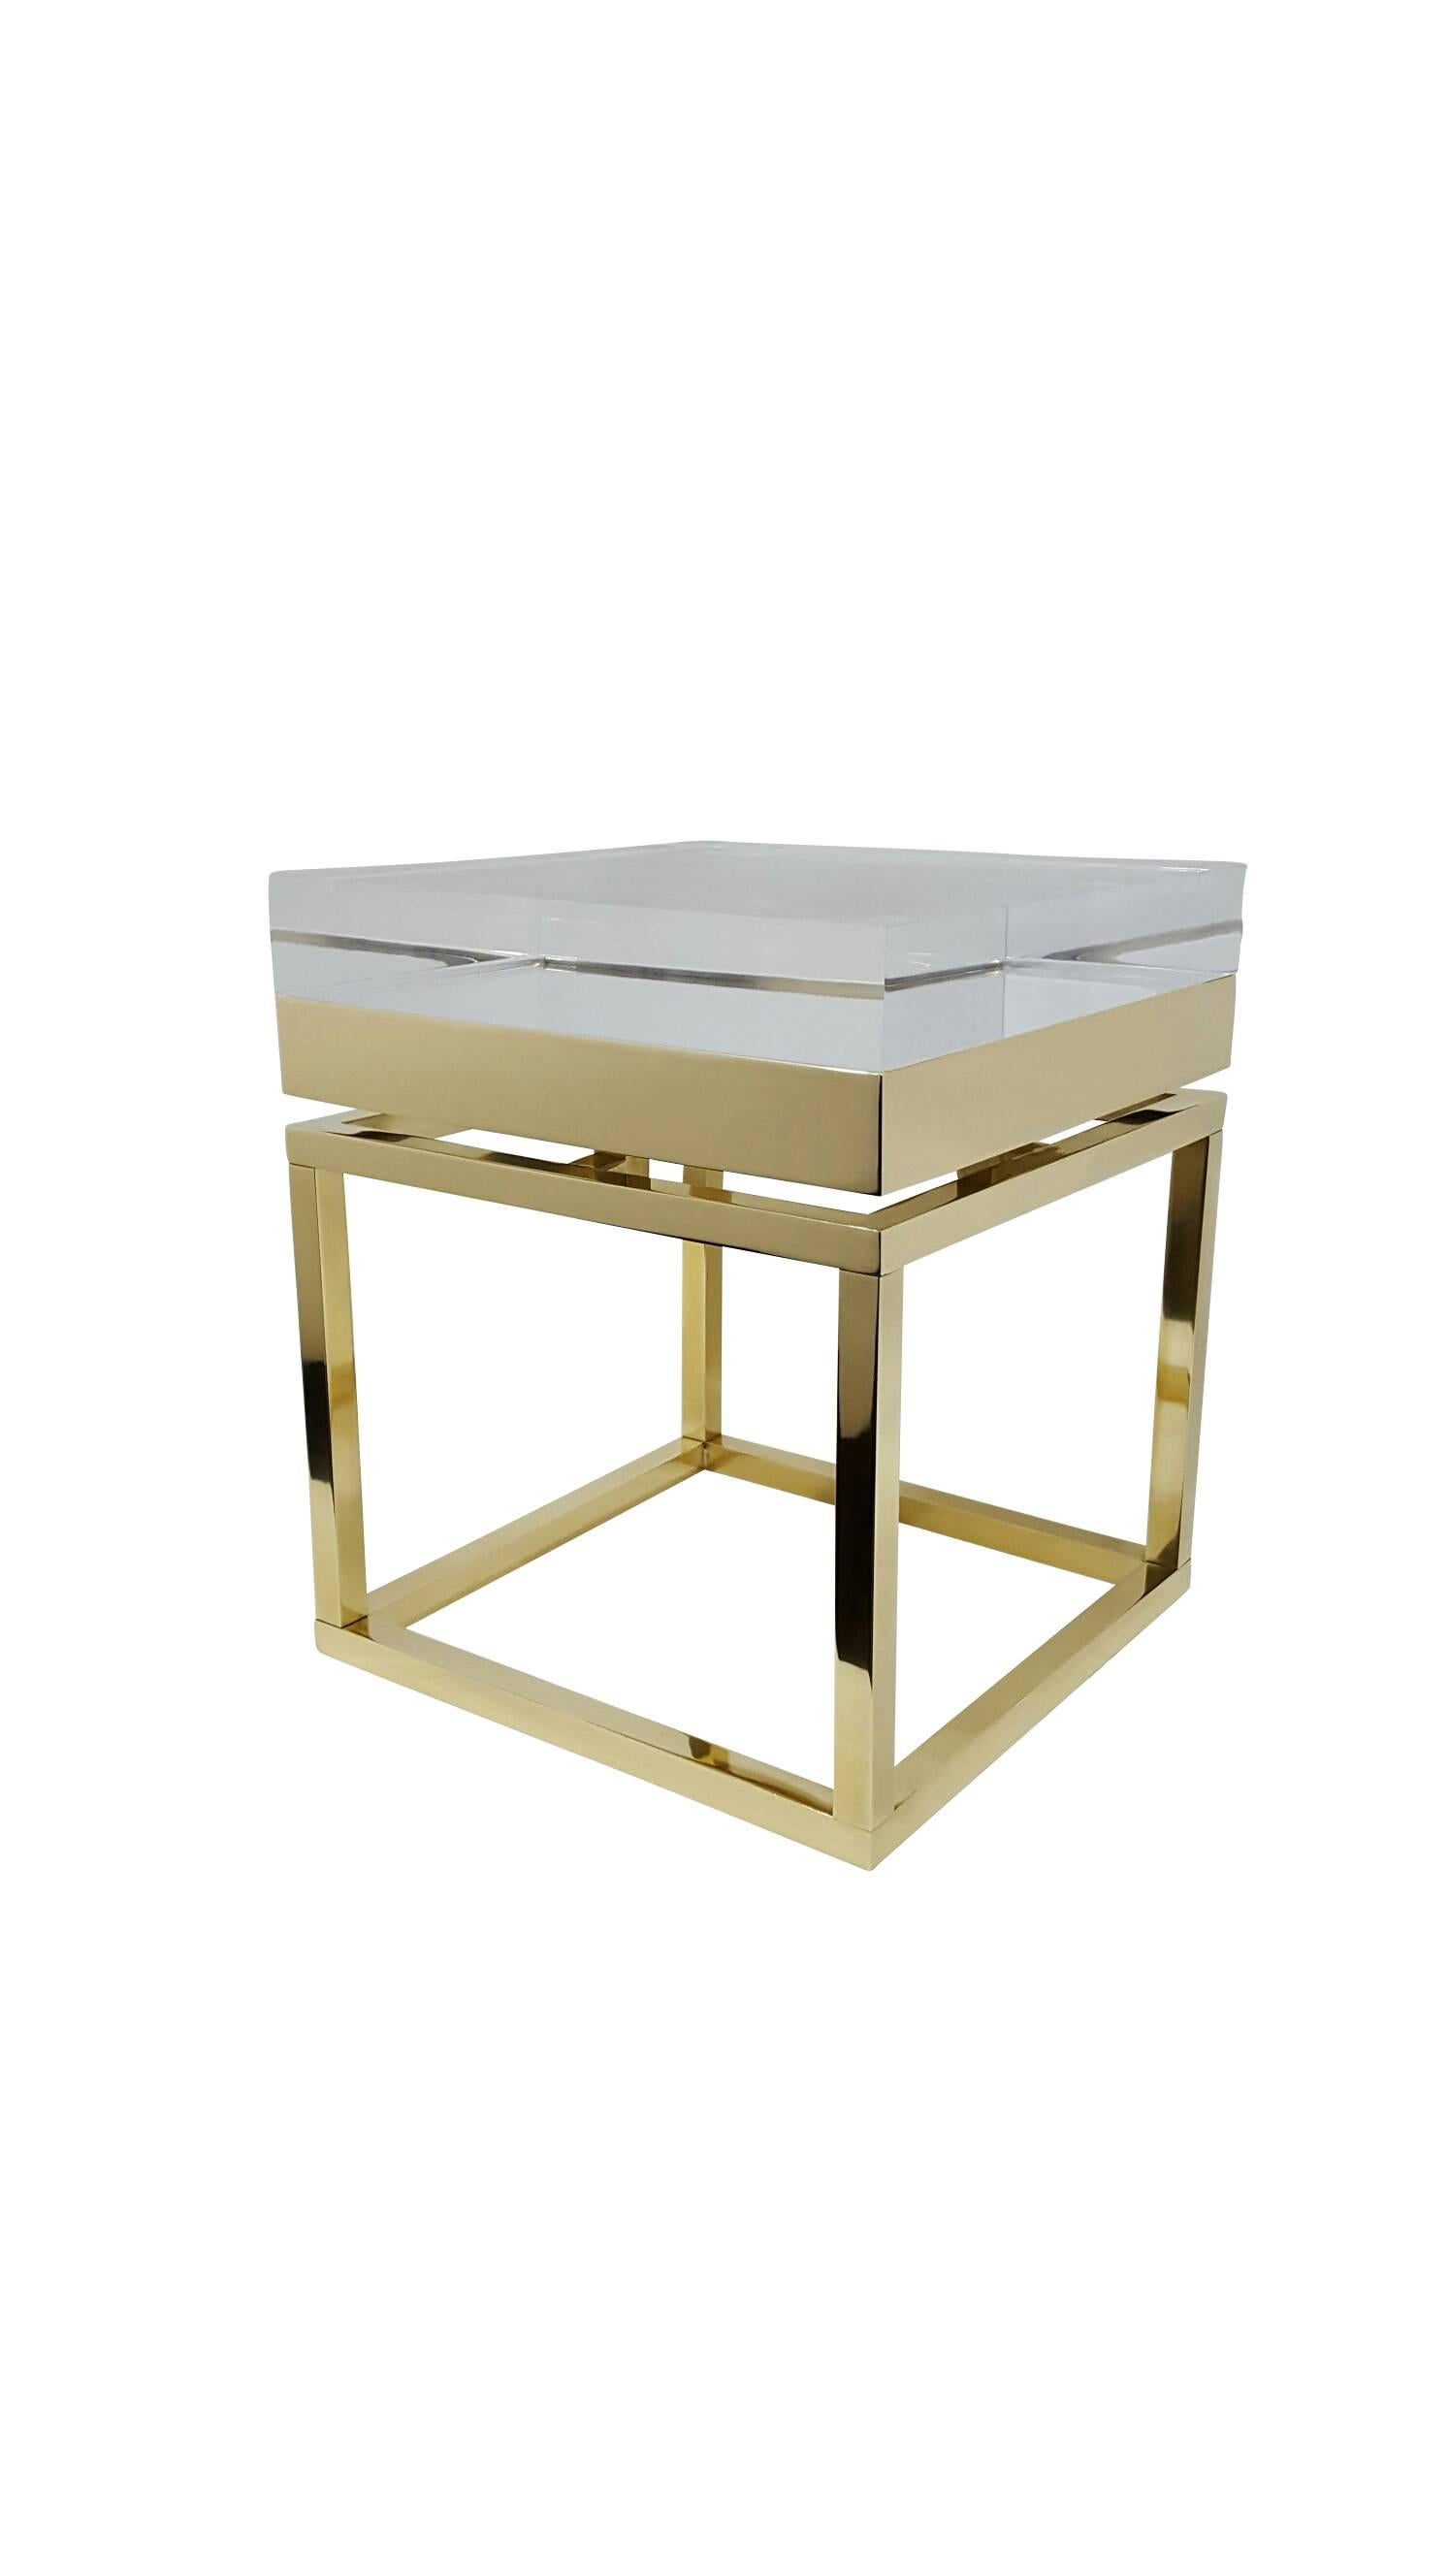 Gorgeous Mies side table, small in brass by Michael Dawkins
Dimensions:
13.75